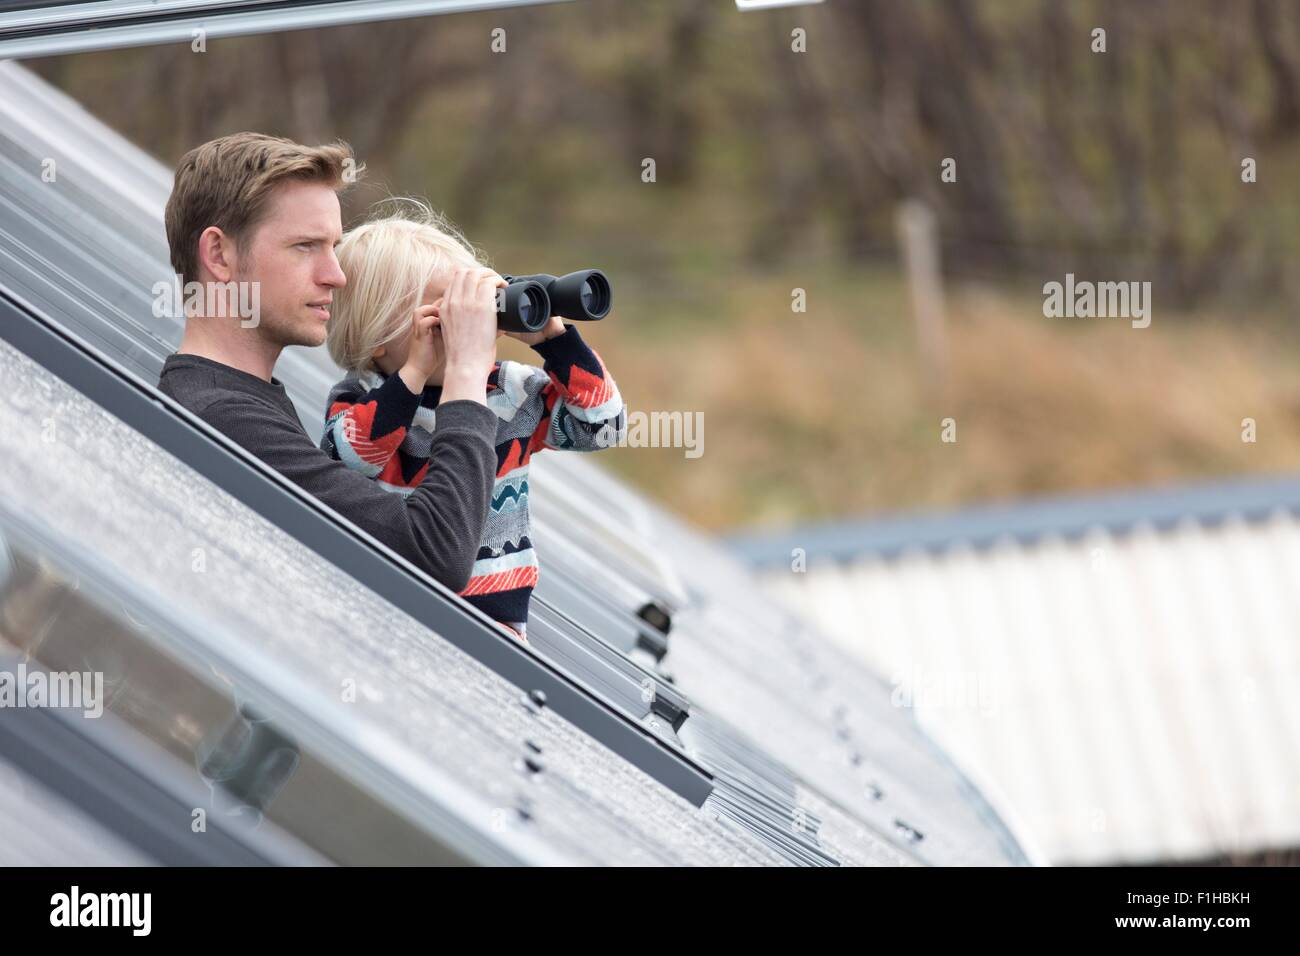 Father and son looking through rooflight, boy using binoculars Stock Photo